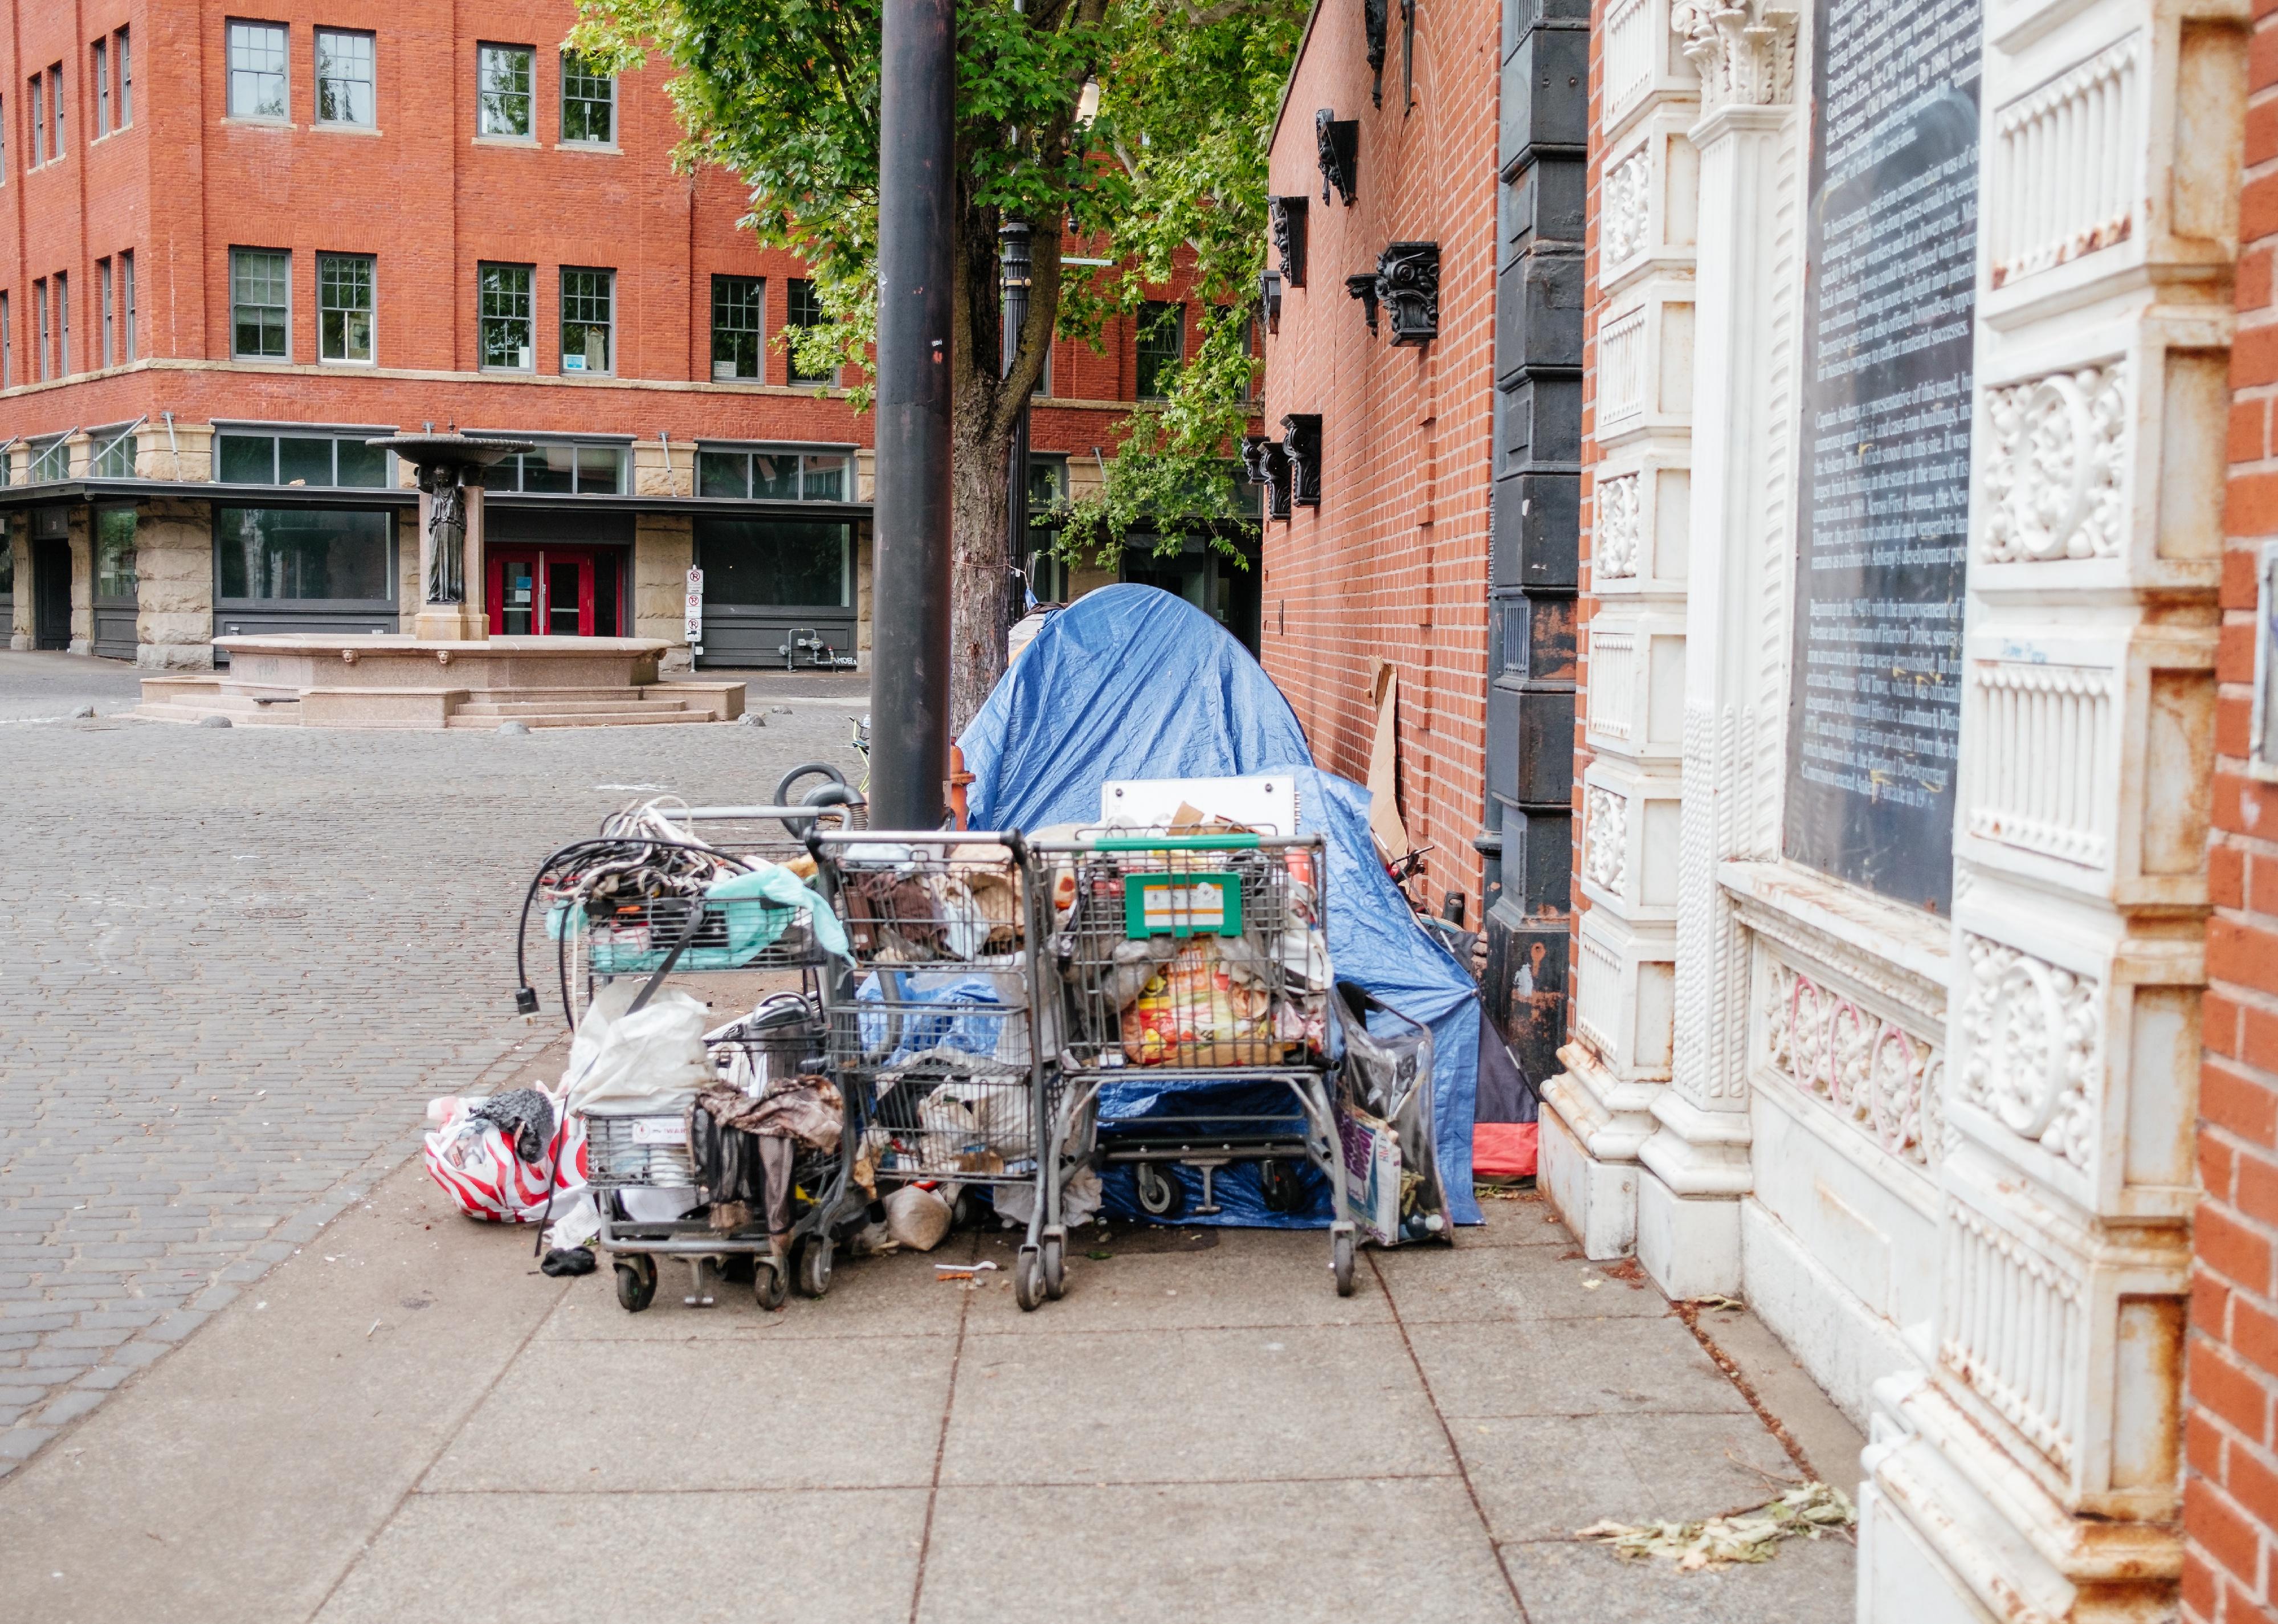 Homeless person's tent and shopping carts on the street in Portland.